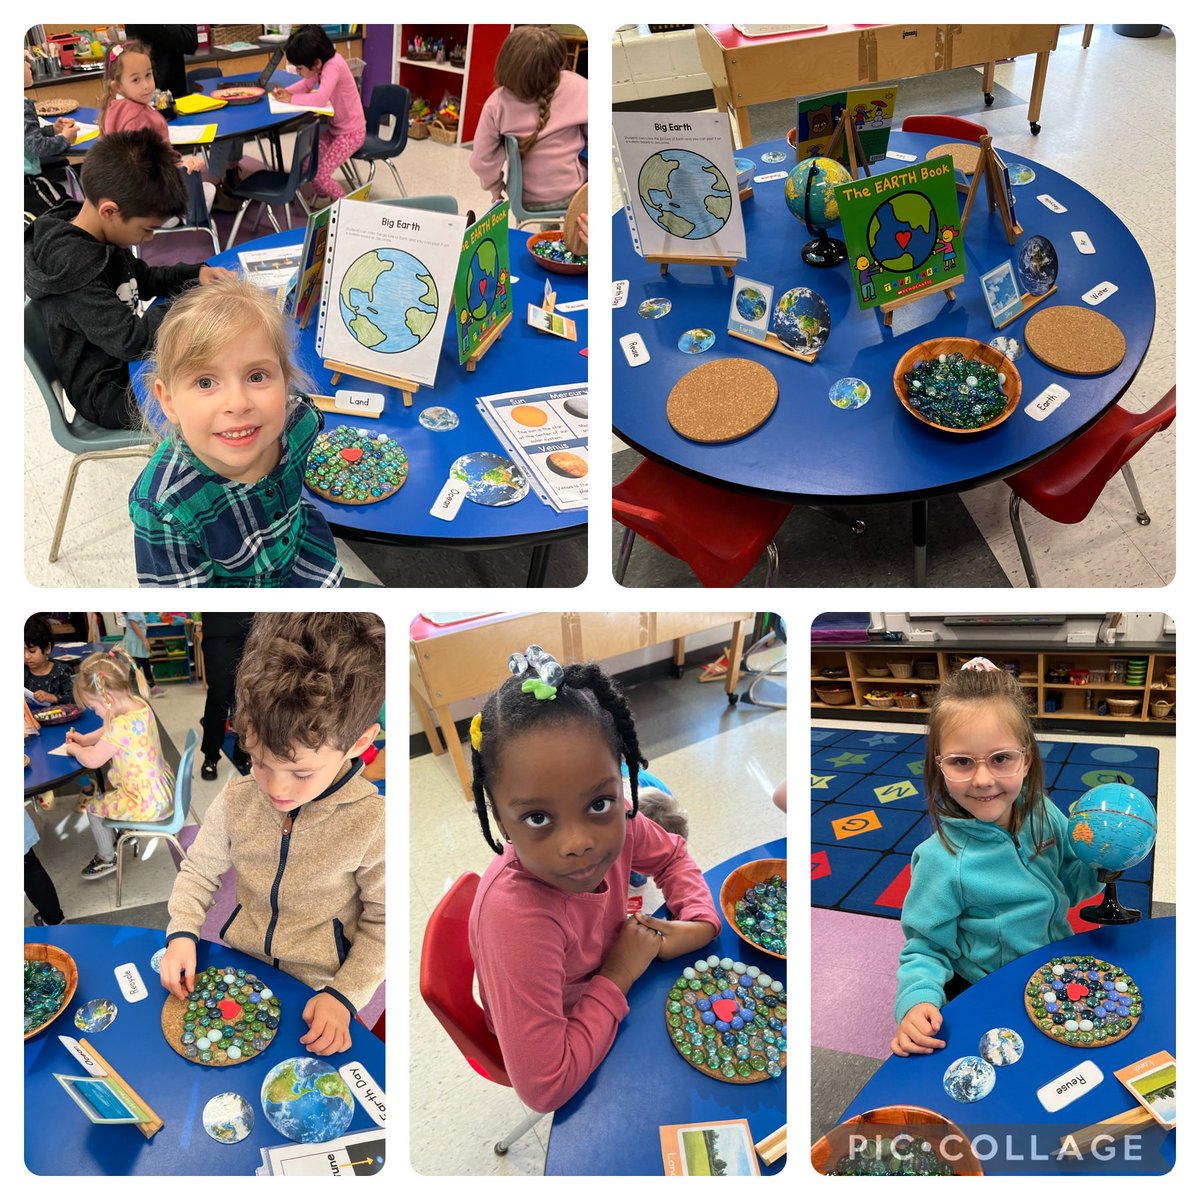 We continue to learn about Earth Day this week. Ss explore creating Mother Earth with looseparts. ⁦@mrsmcintyre1m⁩ ⁦@mrs_shaw33⁩ ⁦@msekinderland⁩ ⁦@orellana_ivett⁩